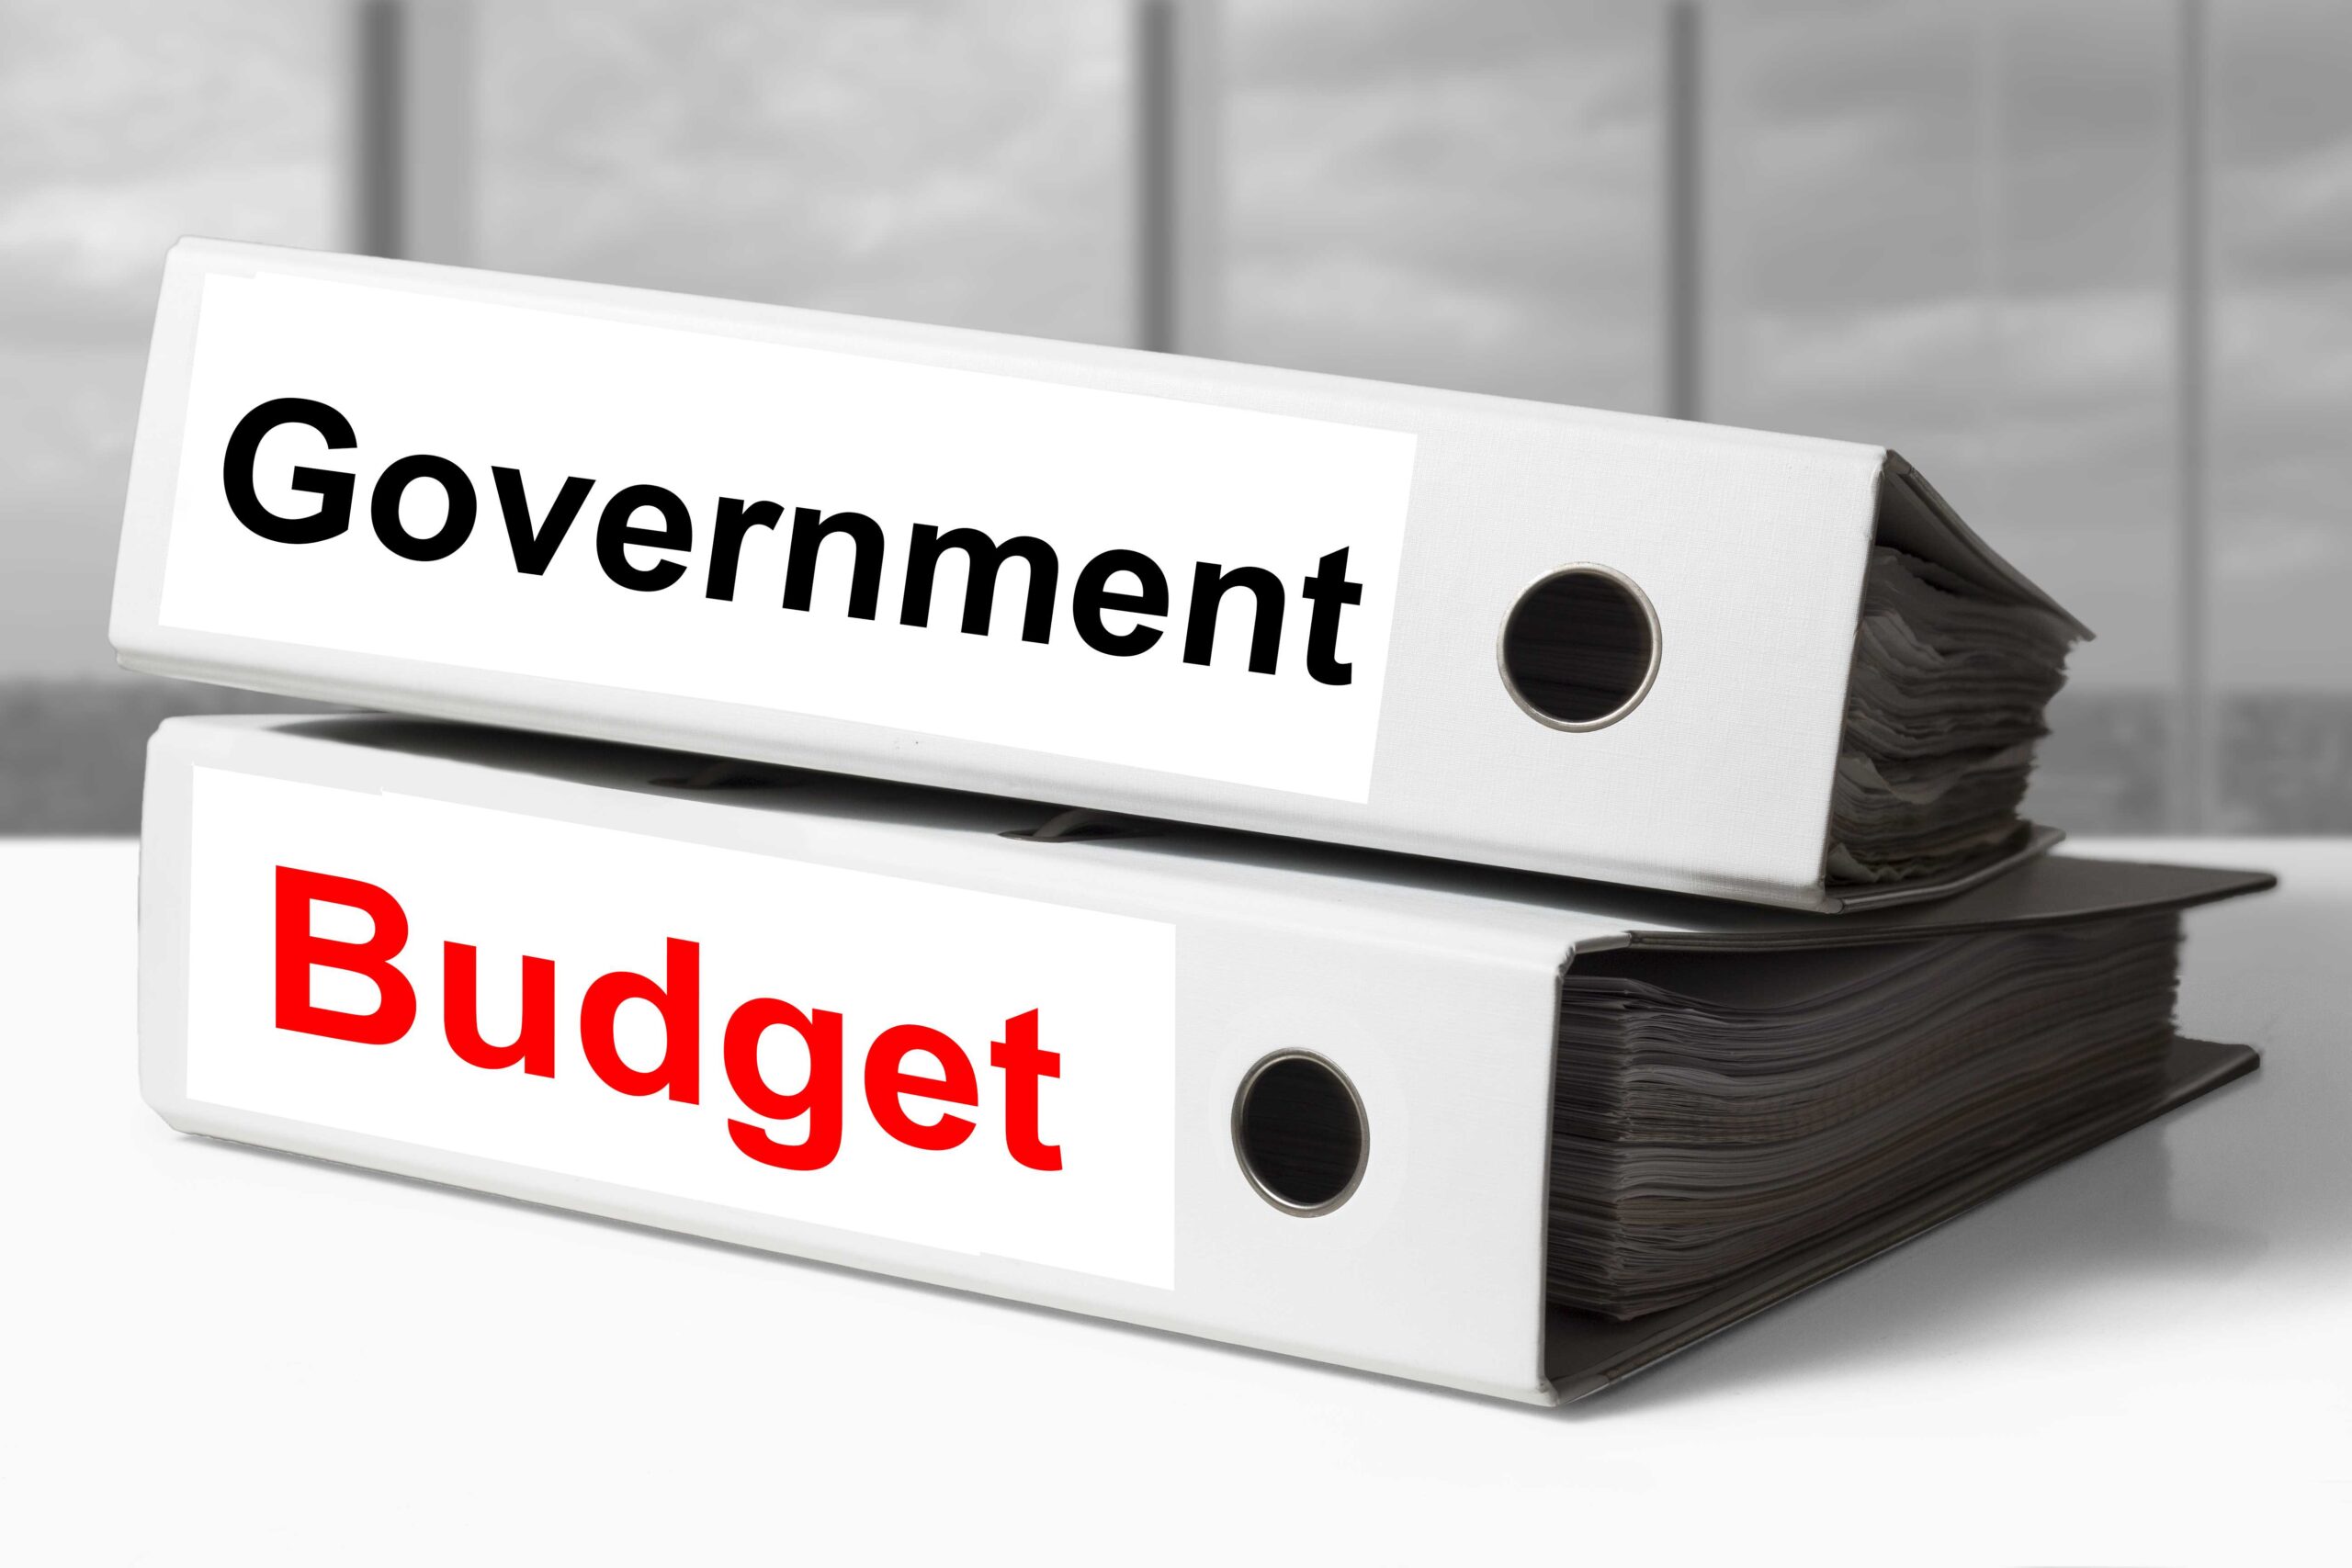 A spring Budget cycle will resume shortly